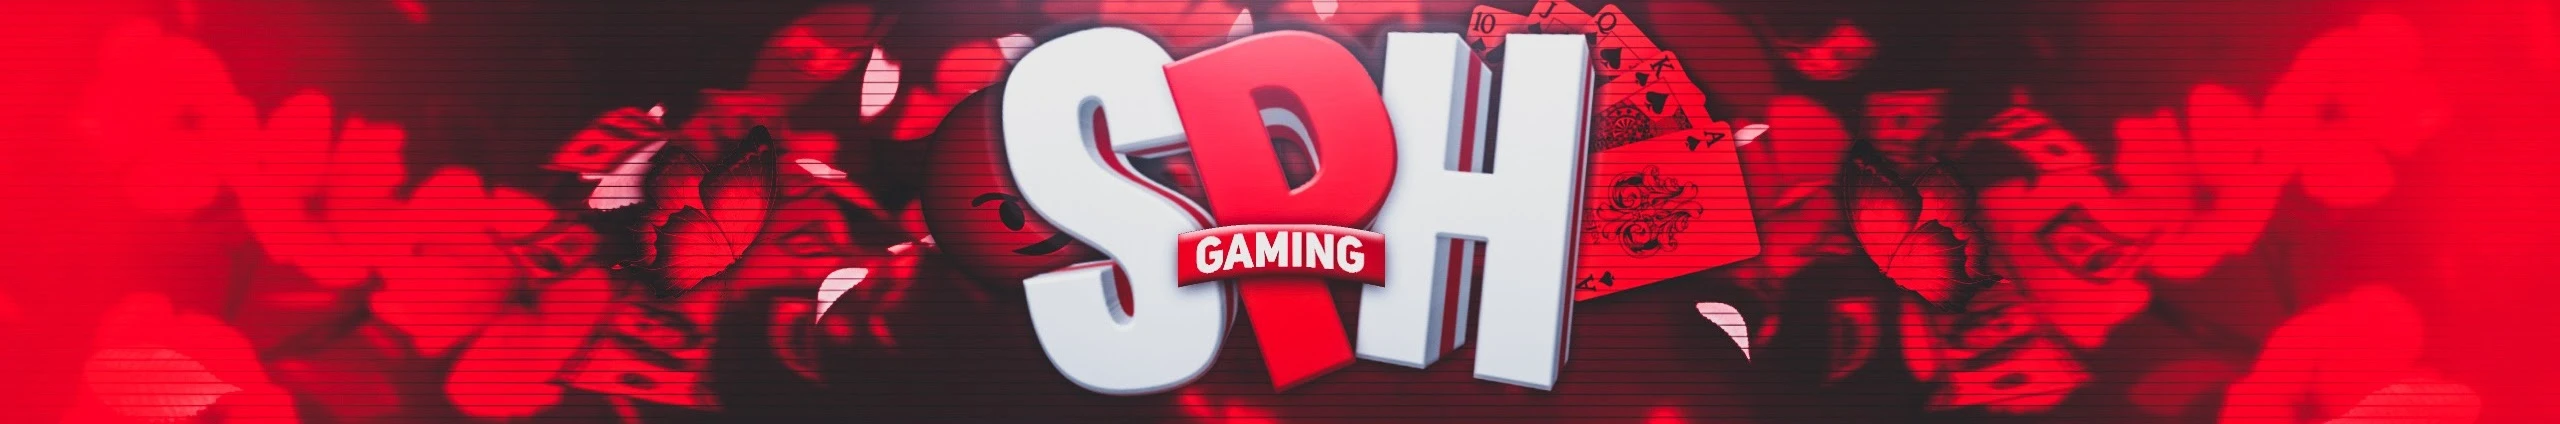 SPH Gaming's BANNER